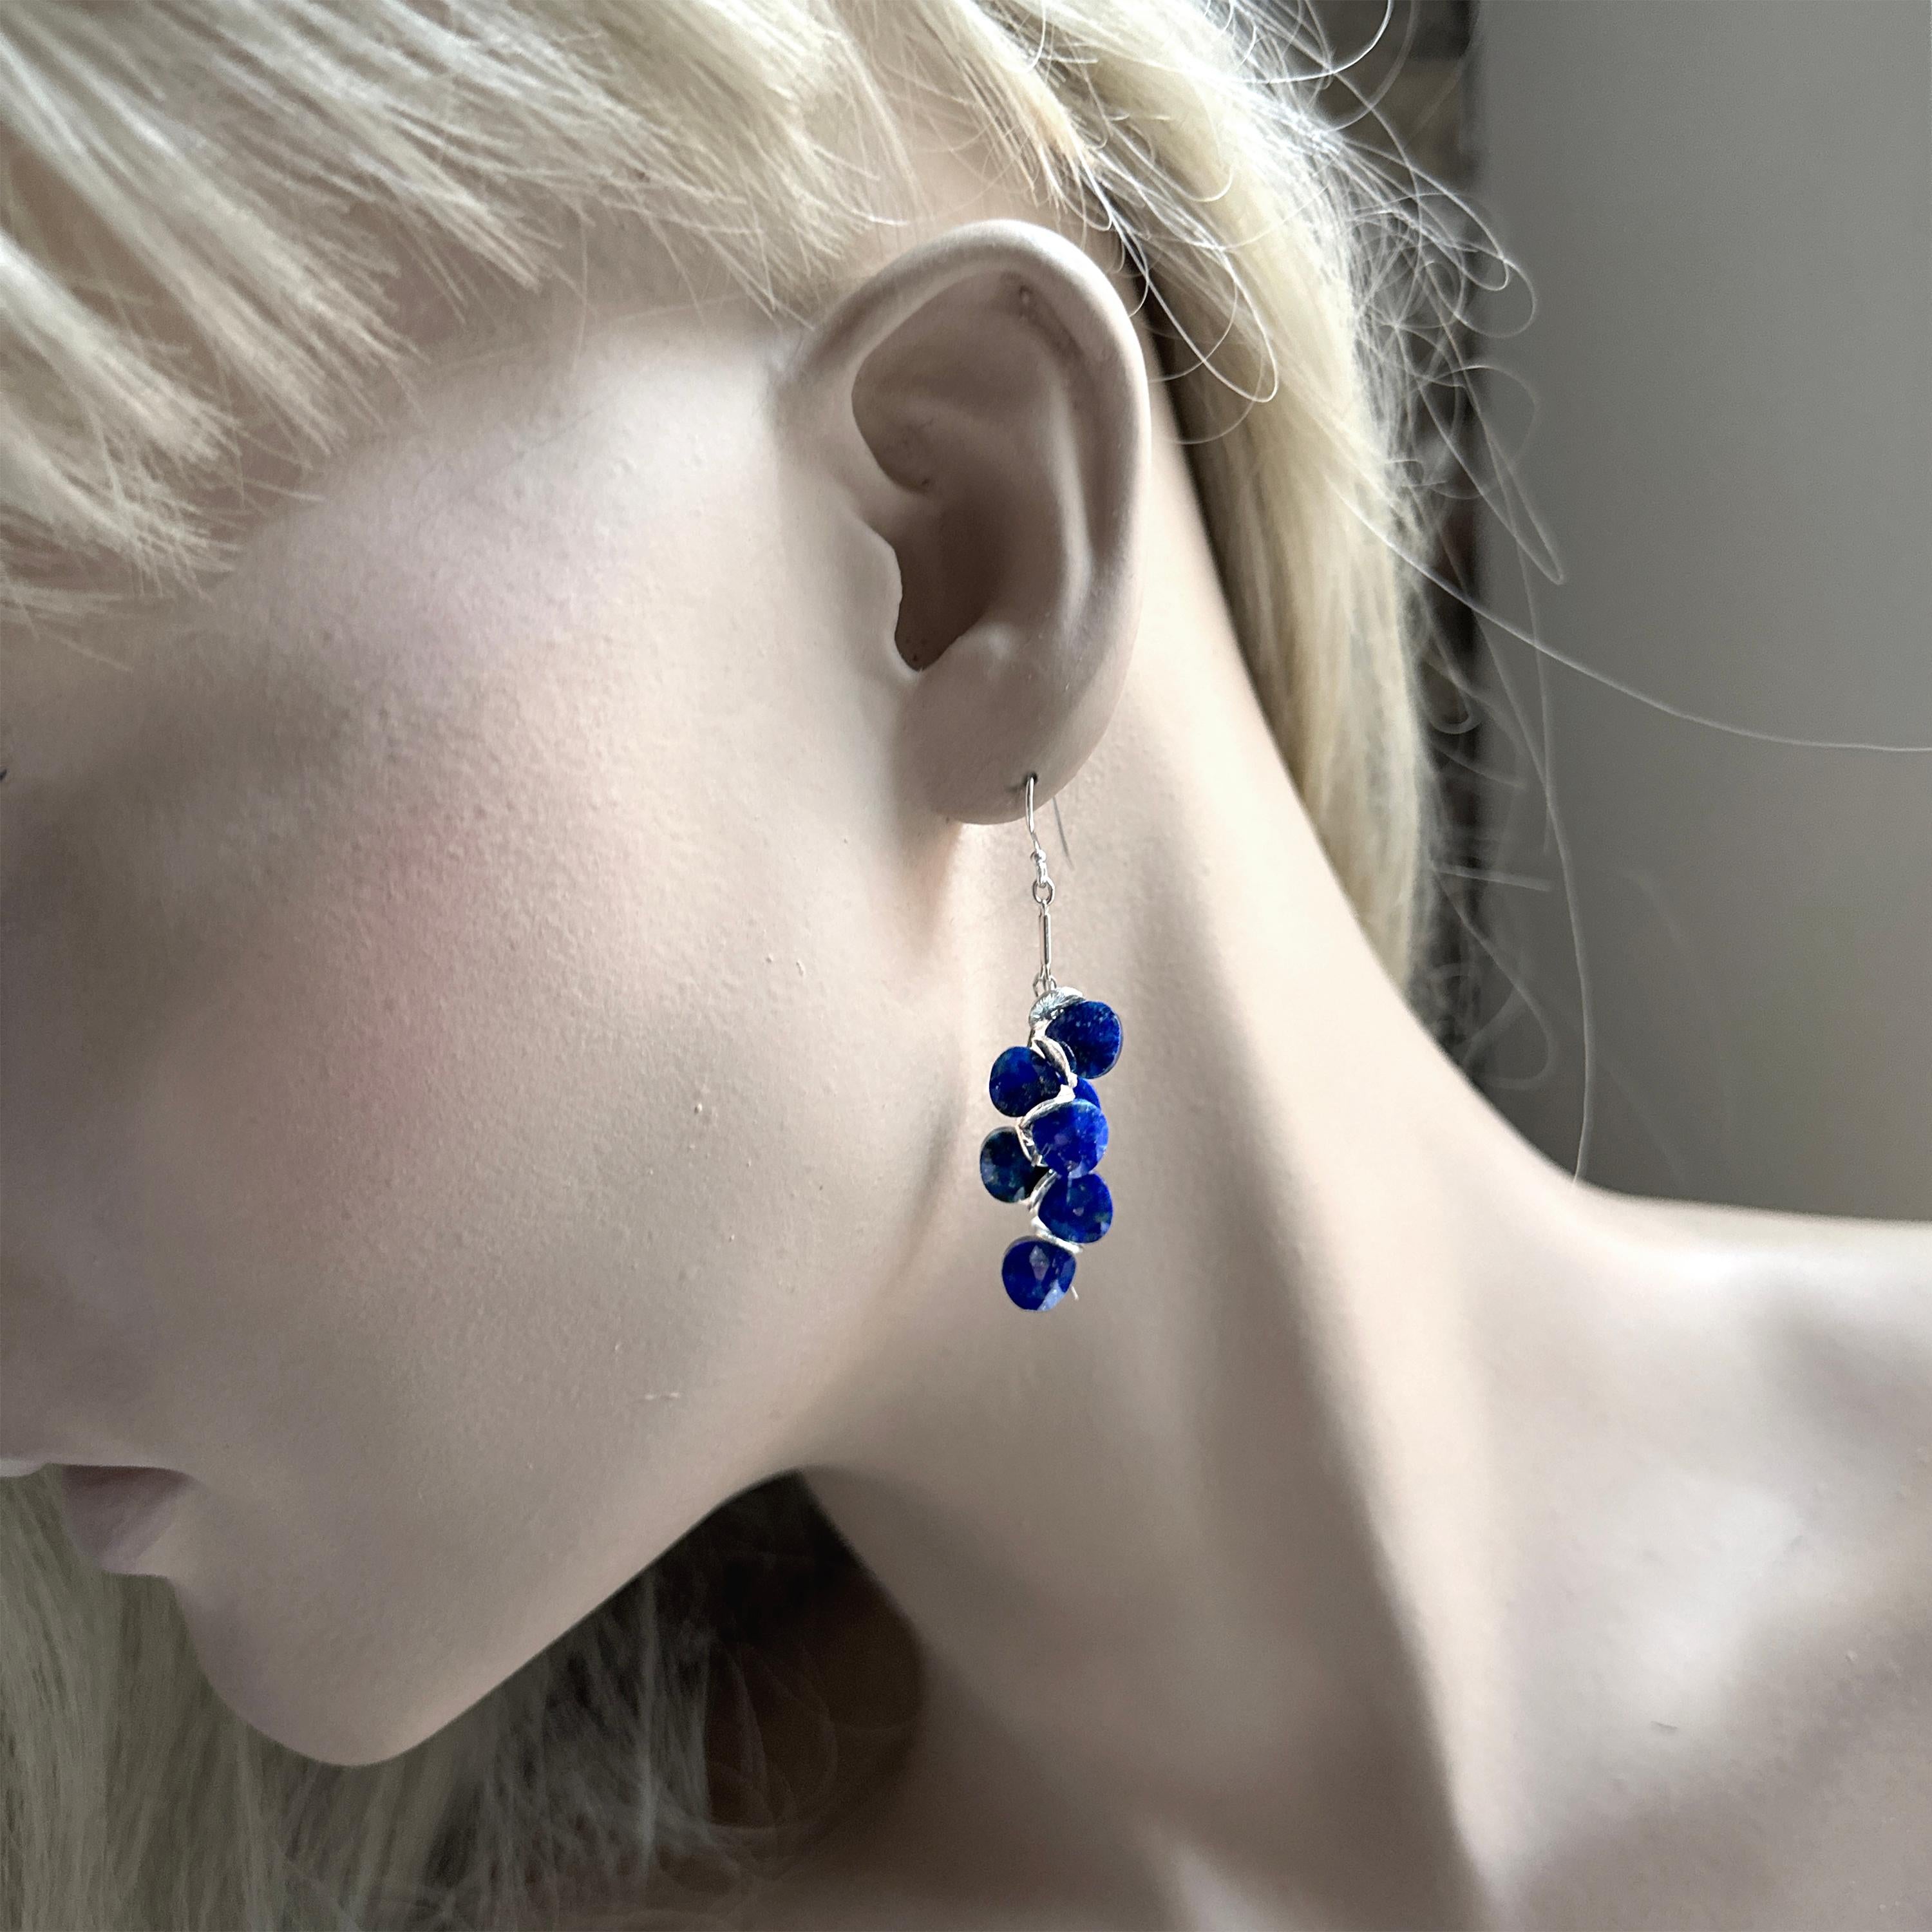 Let elegance sparkle from your ears with these exquisite Lapis Sterling Signature Earrings. Hand crafted with deep blue lapis briolette clusters, sterling silver details, and ear wires for a secure fit. Show off your unique style and make heads